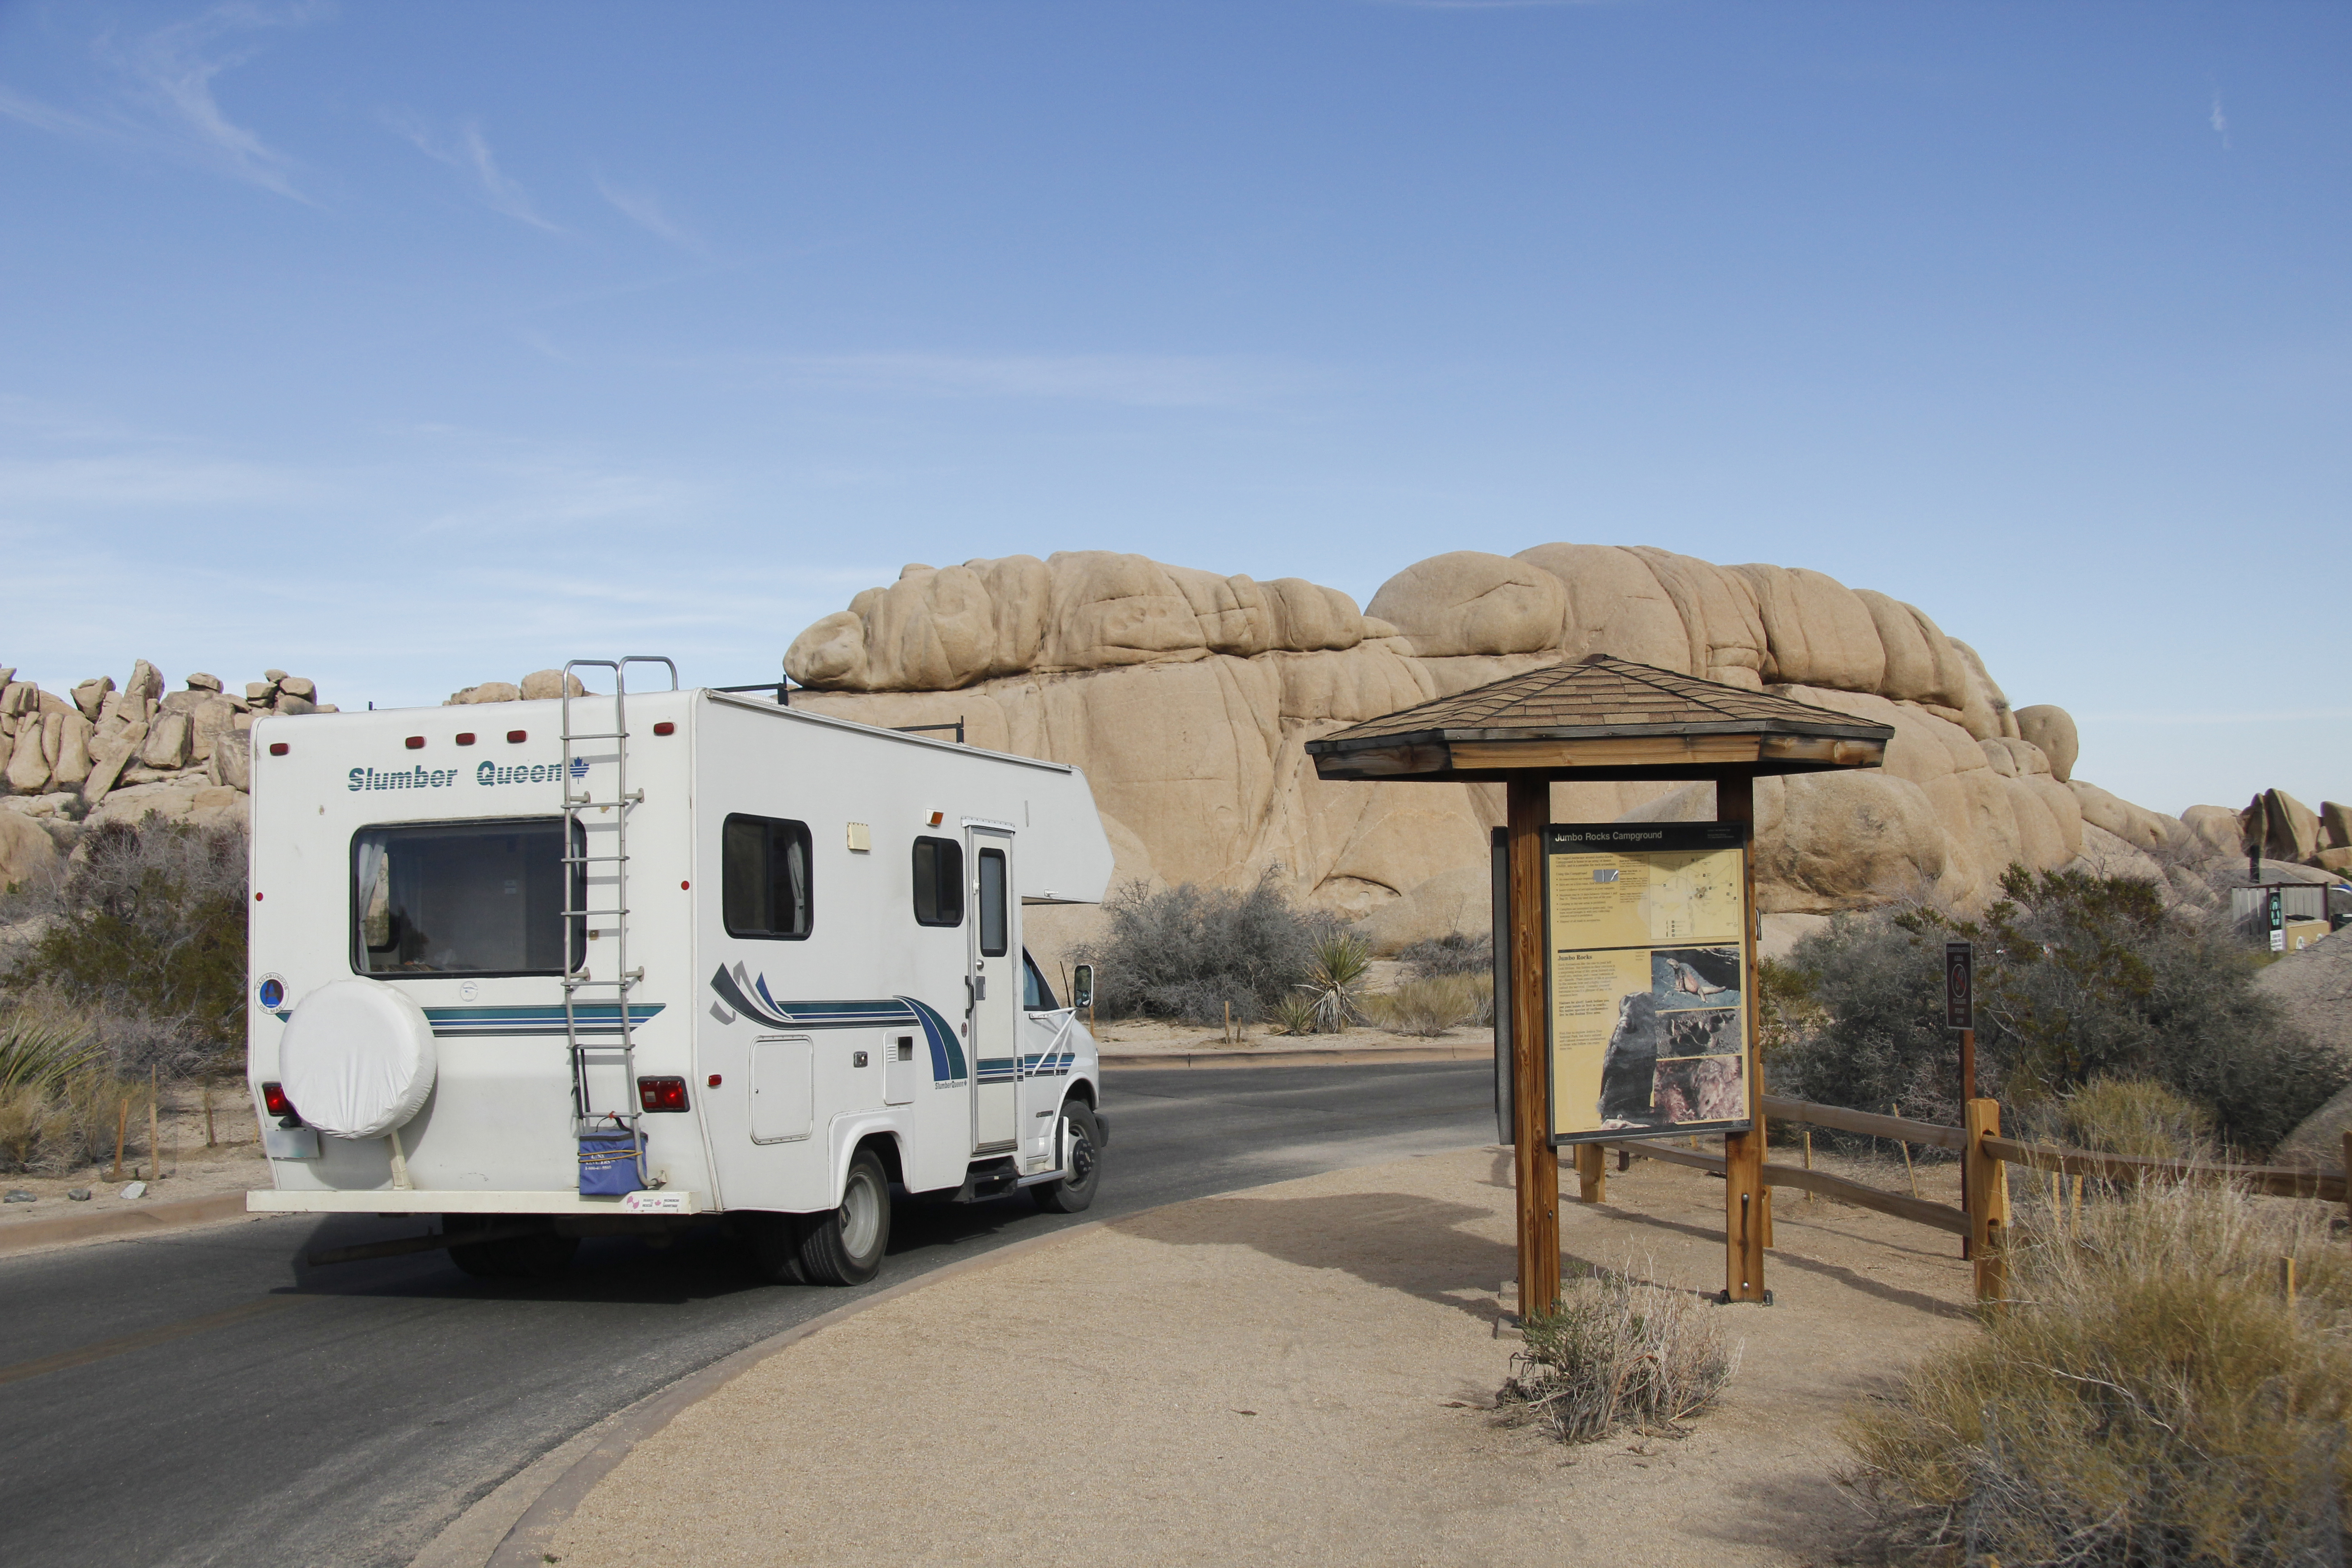 An RV drives past an campground information board.